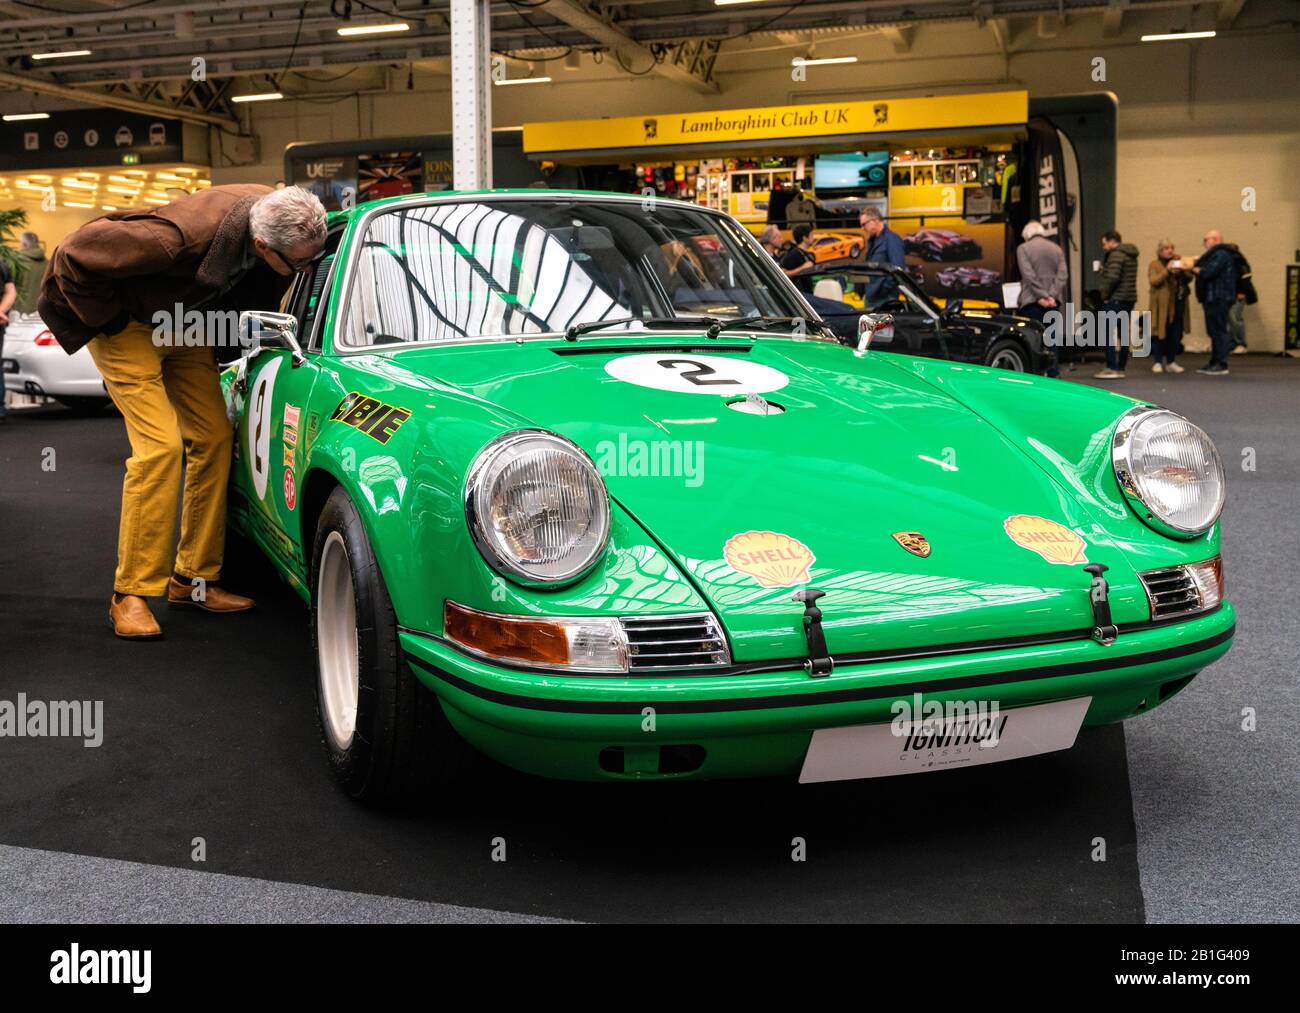 22 Feb 2020 - London, UK. Old man curiously checking on a classic Porsche 911 model at Classic Car Show in London. Stock Photo